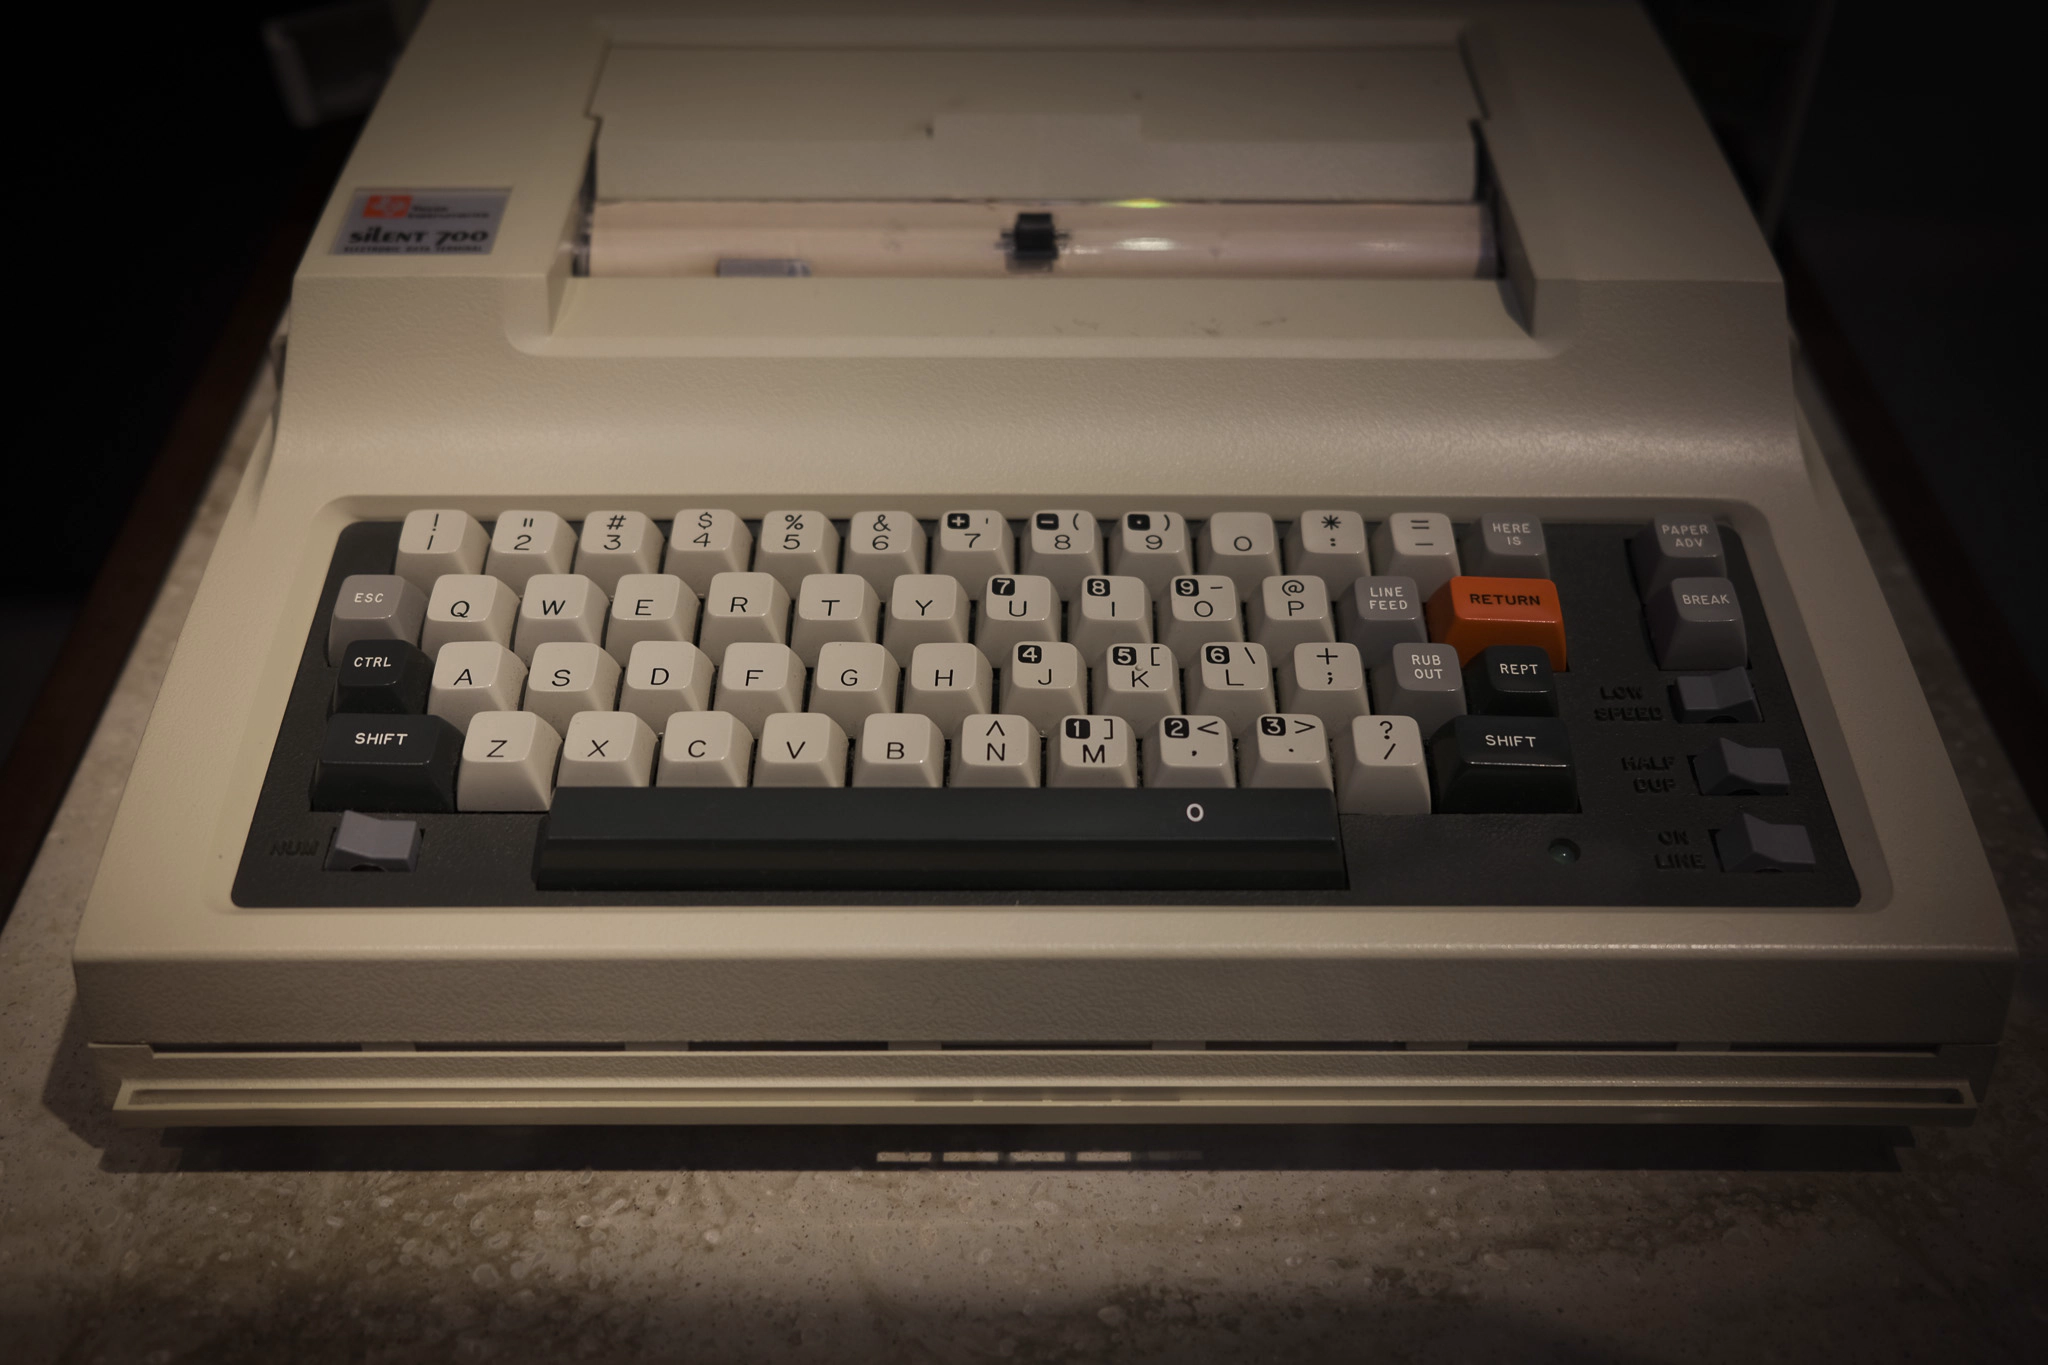 A photograph of the Silent 700, a computer on the verge of the computer-typewriter transition